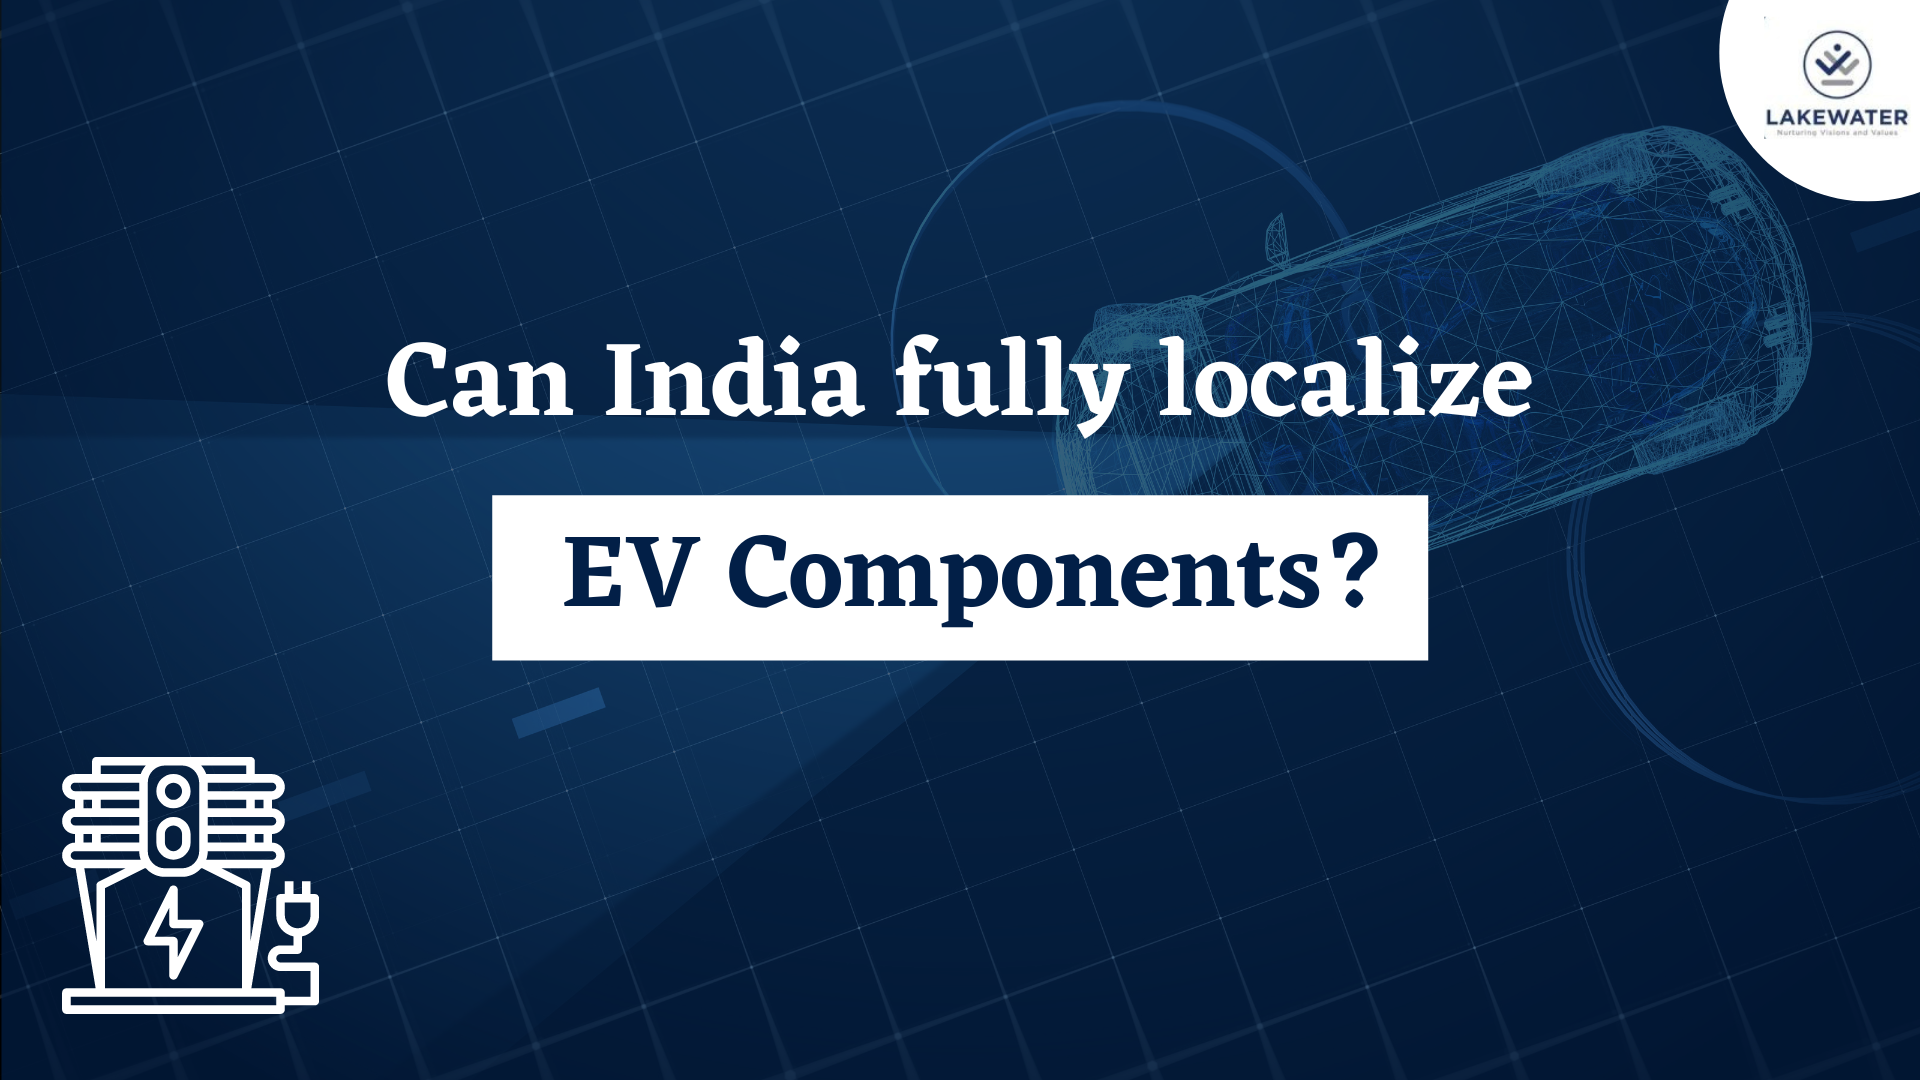 Can India fully localize EV components?